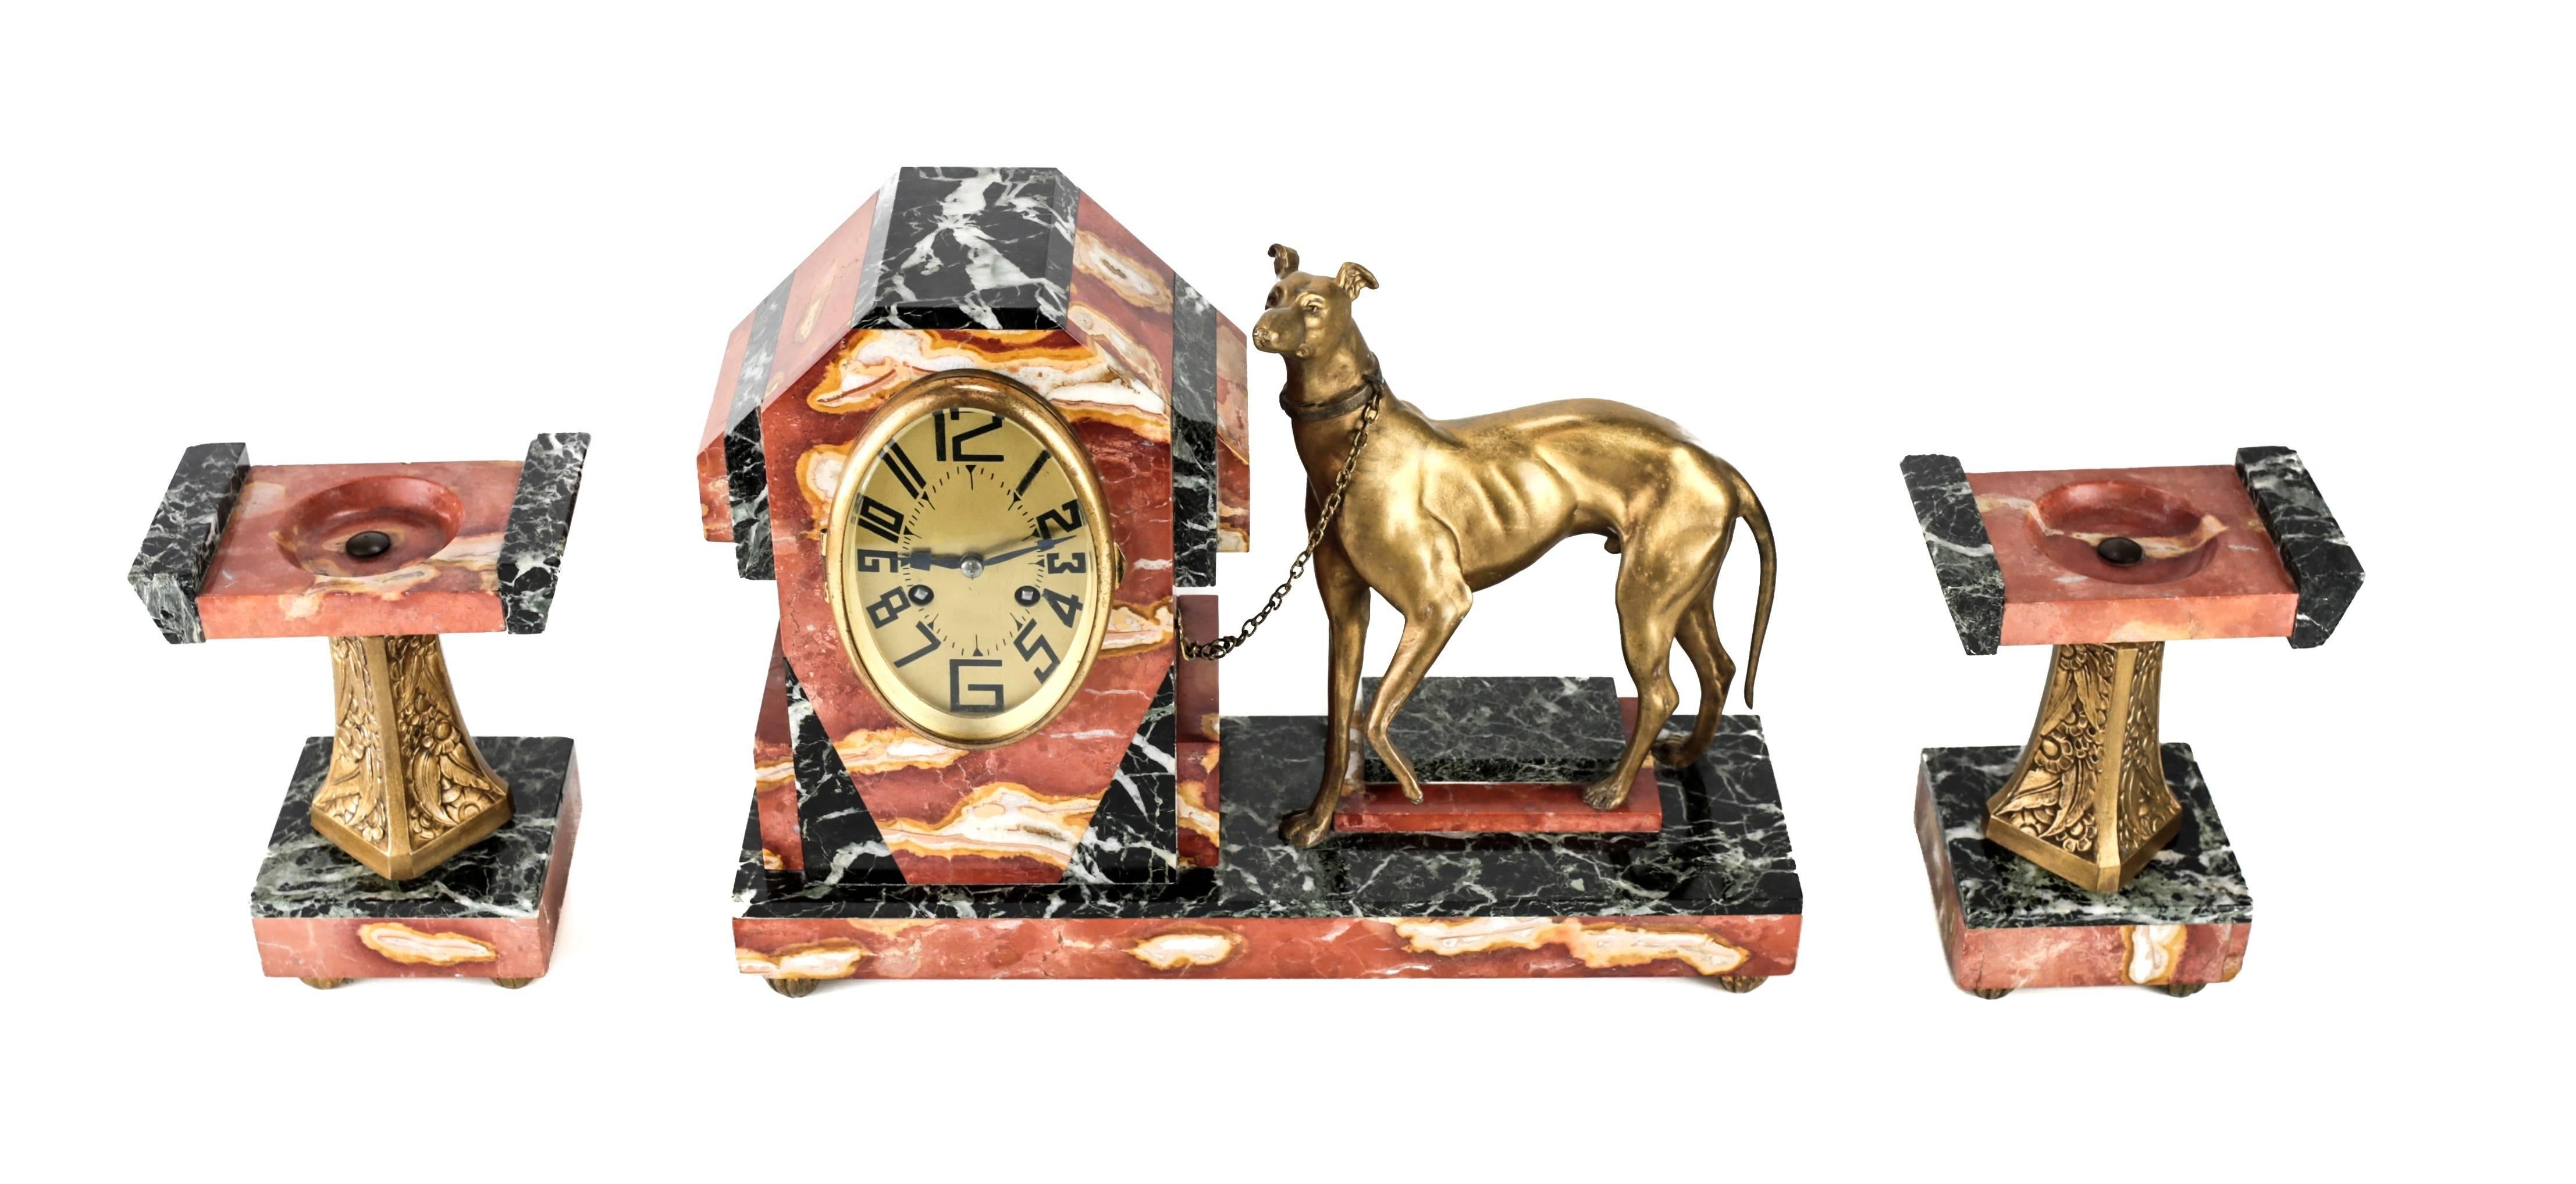 An Art Deco three-piece clock garniture with gorgeous red and black marble and gilt French bronze greyhound. The dog chained to the elongated oval clock housing. Matching garnitures, each with floral decorated columns. 

The centre piece: 16